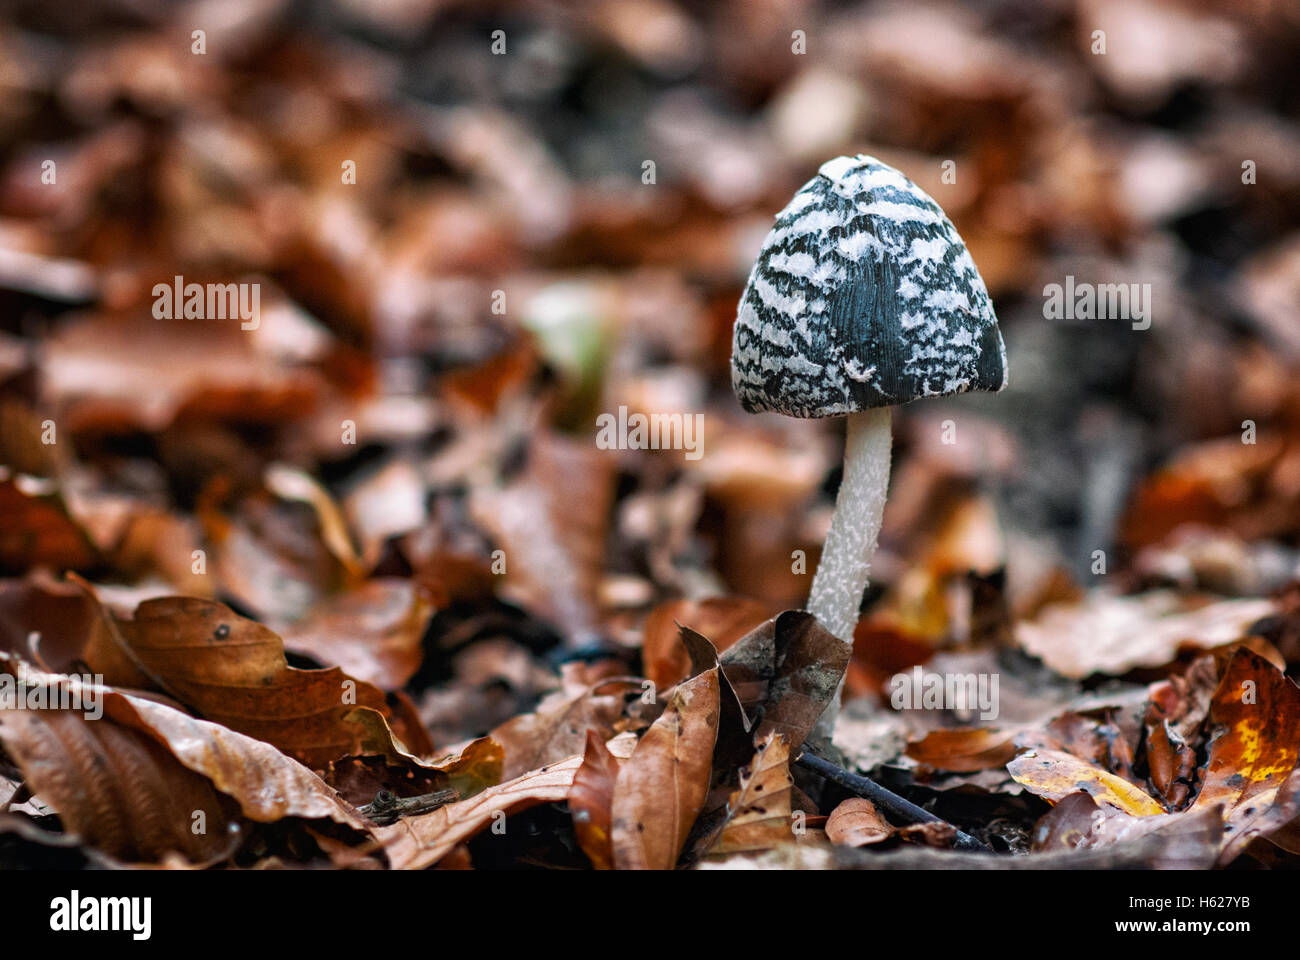 Poisonous mushrooms in forest Stock Photo